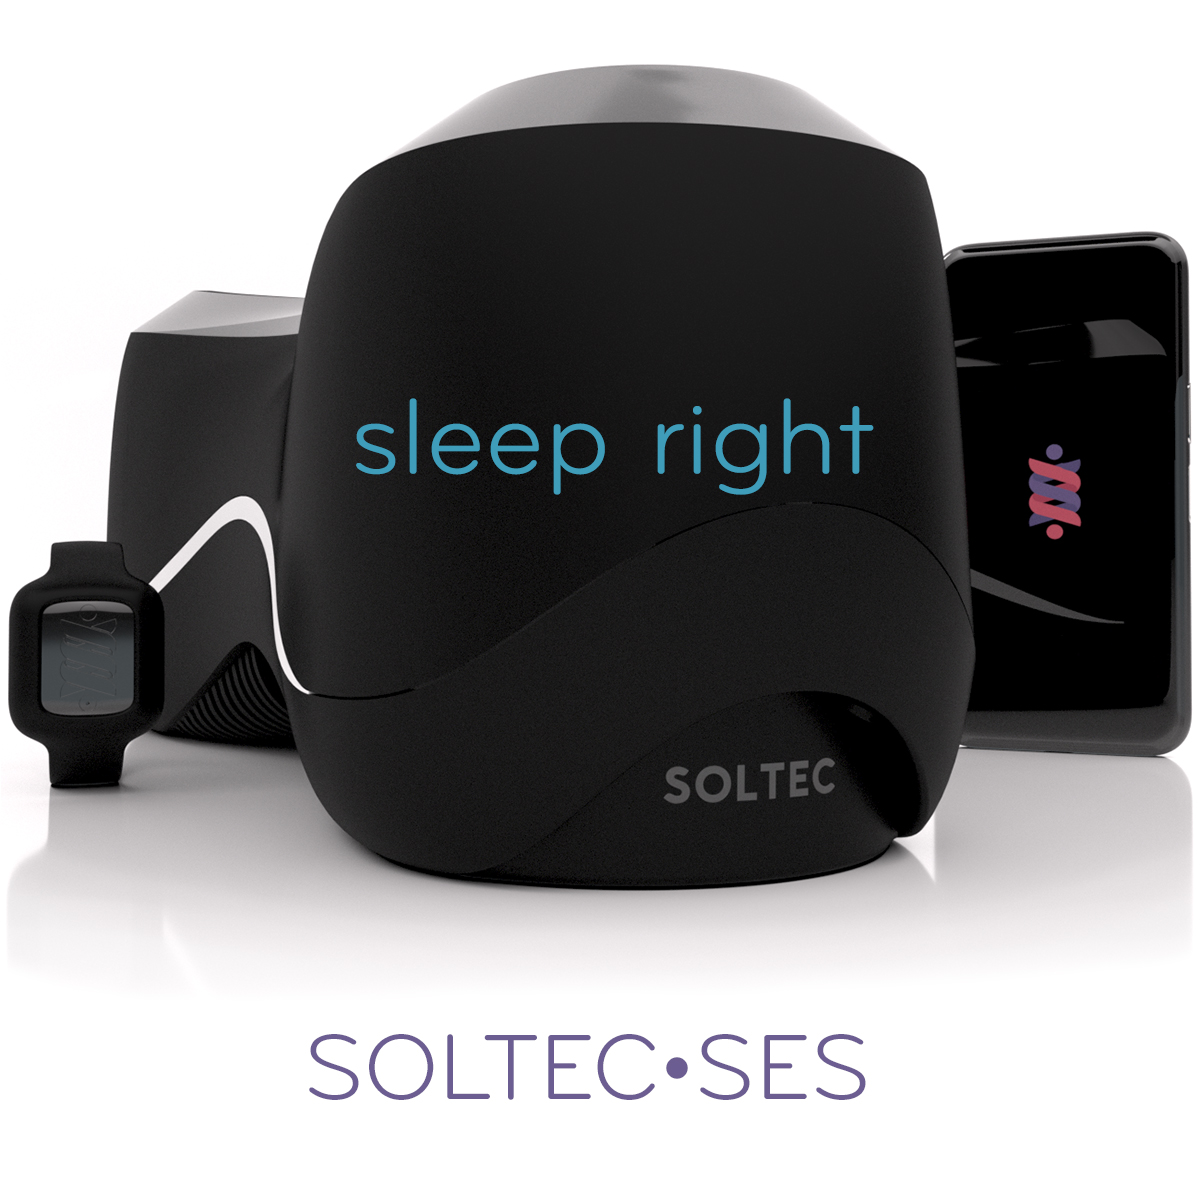 Sleep Right SOLTEC SES image depicts system